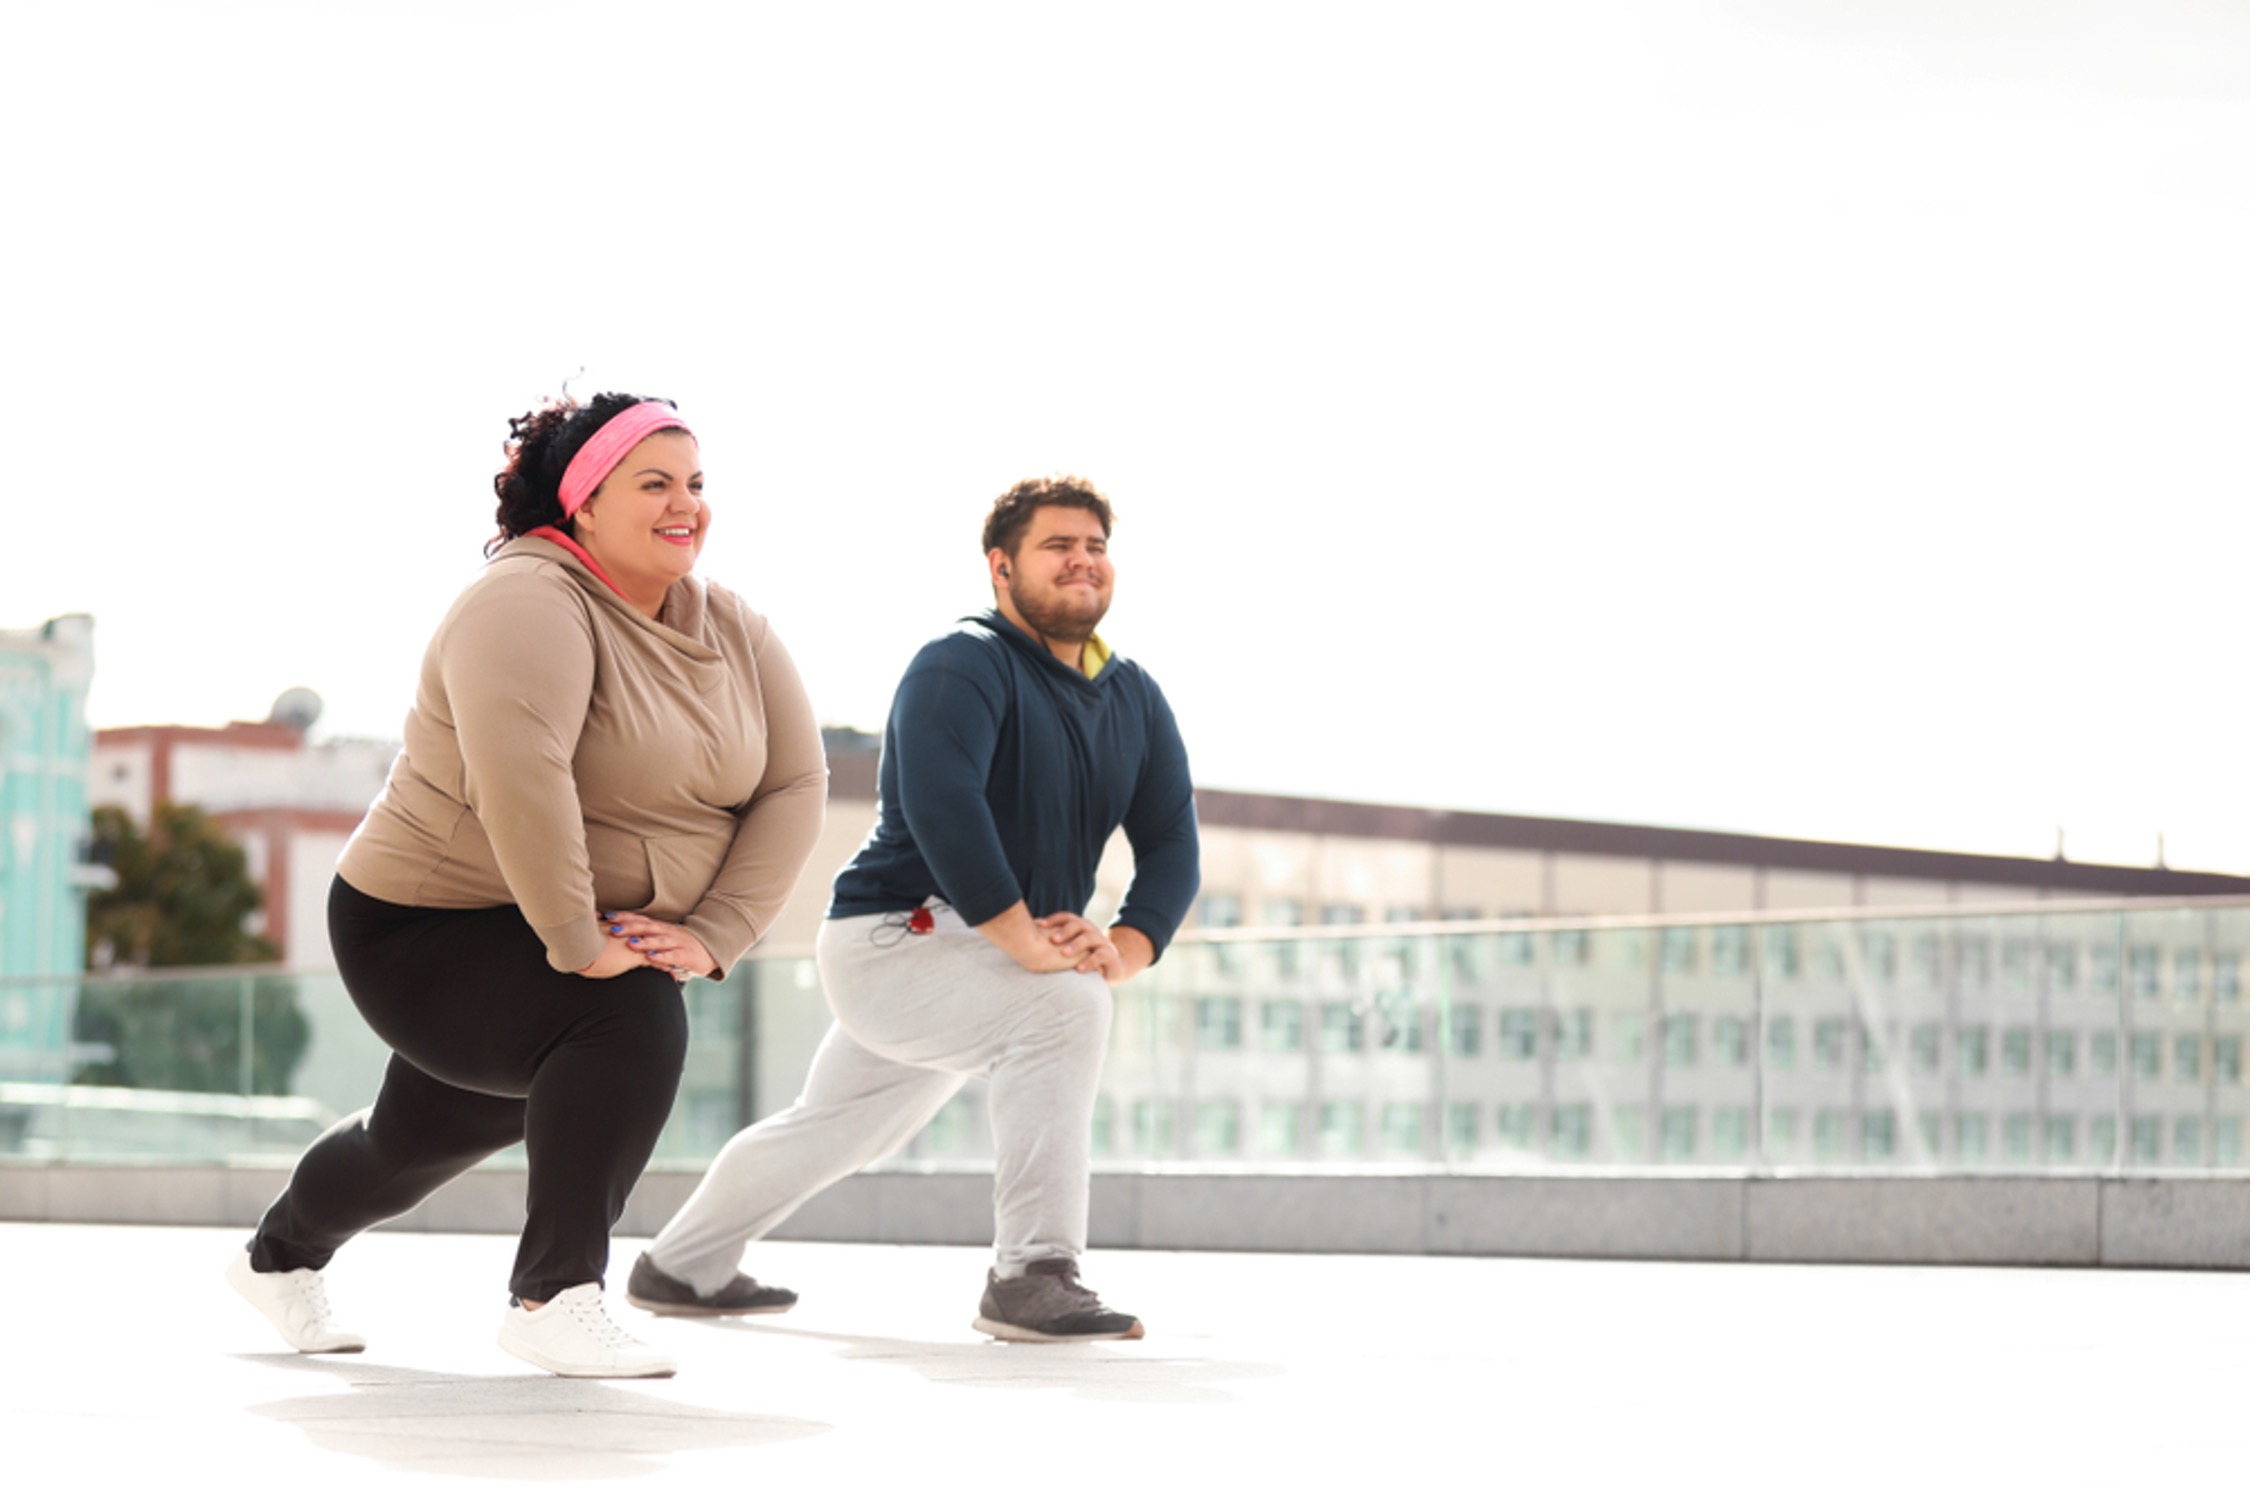 A man and woman happily doing lunge exercises together outside as a part of their weight loss journey.